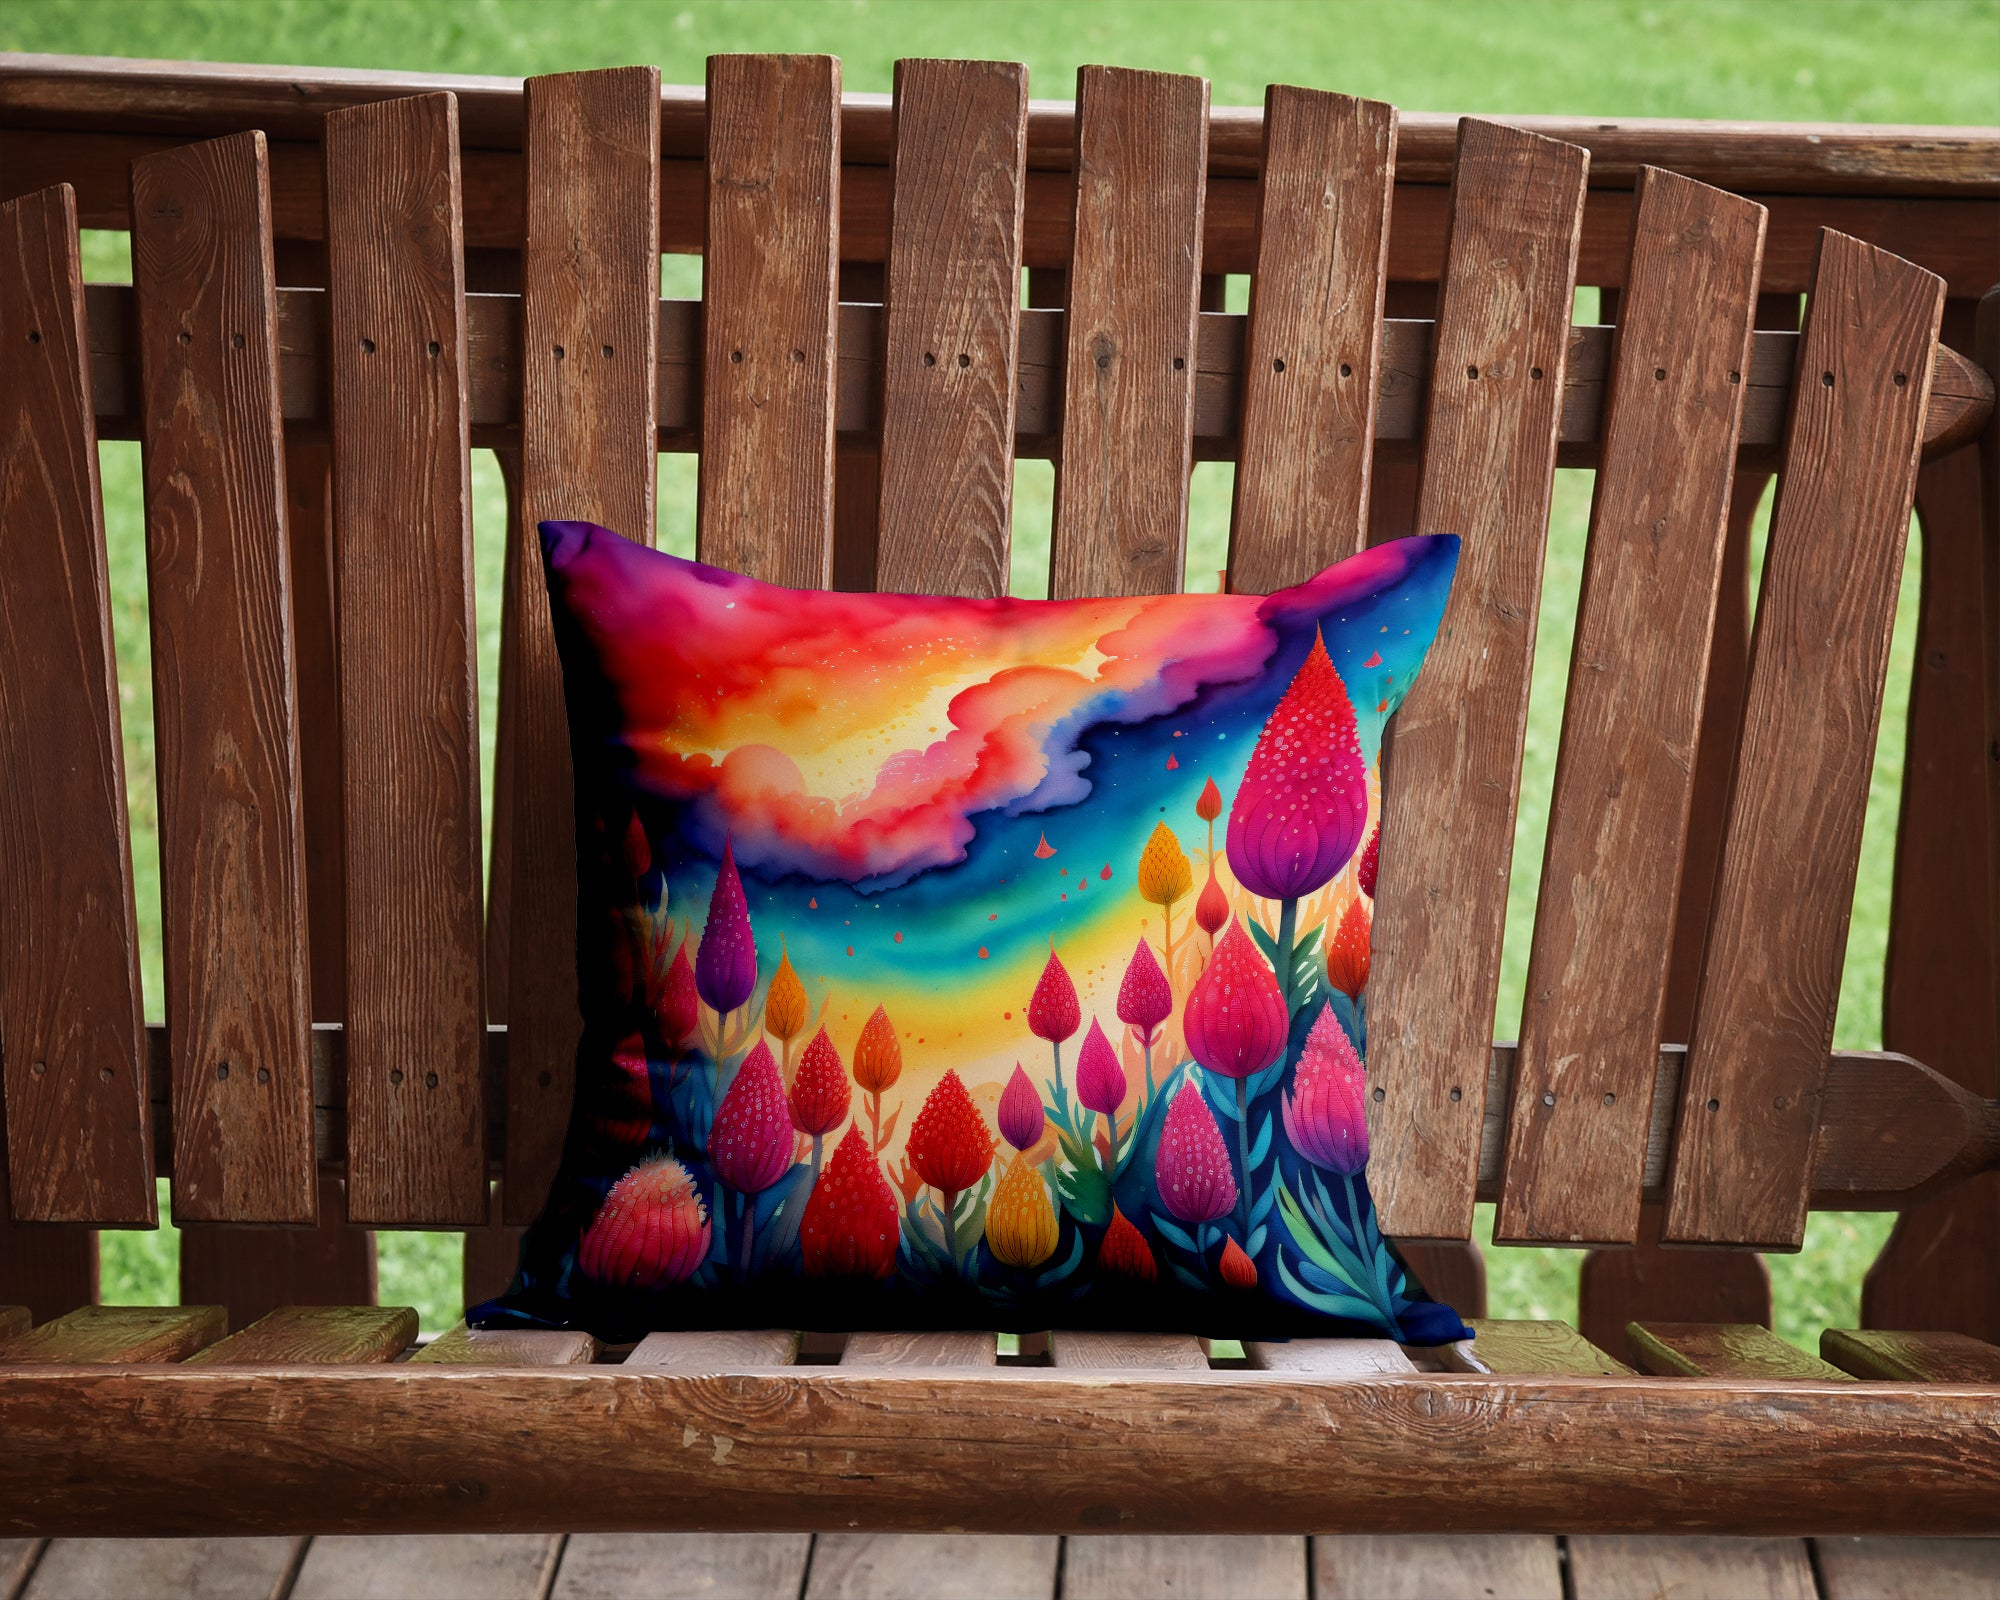 Buy this Colorful Celosia Fabric Decorative Pillow